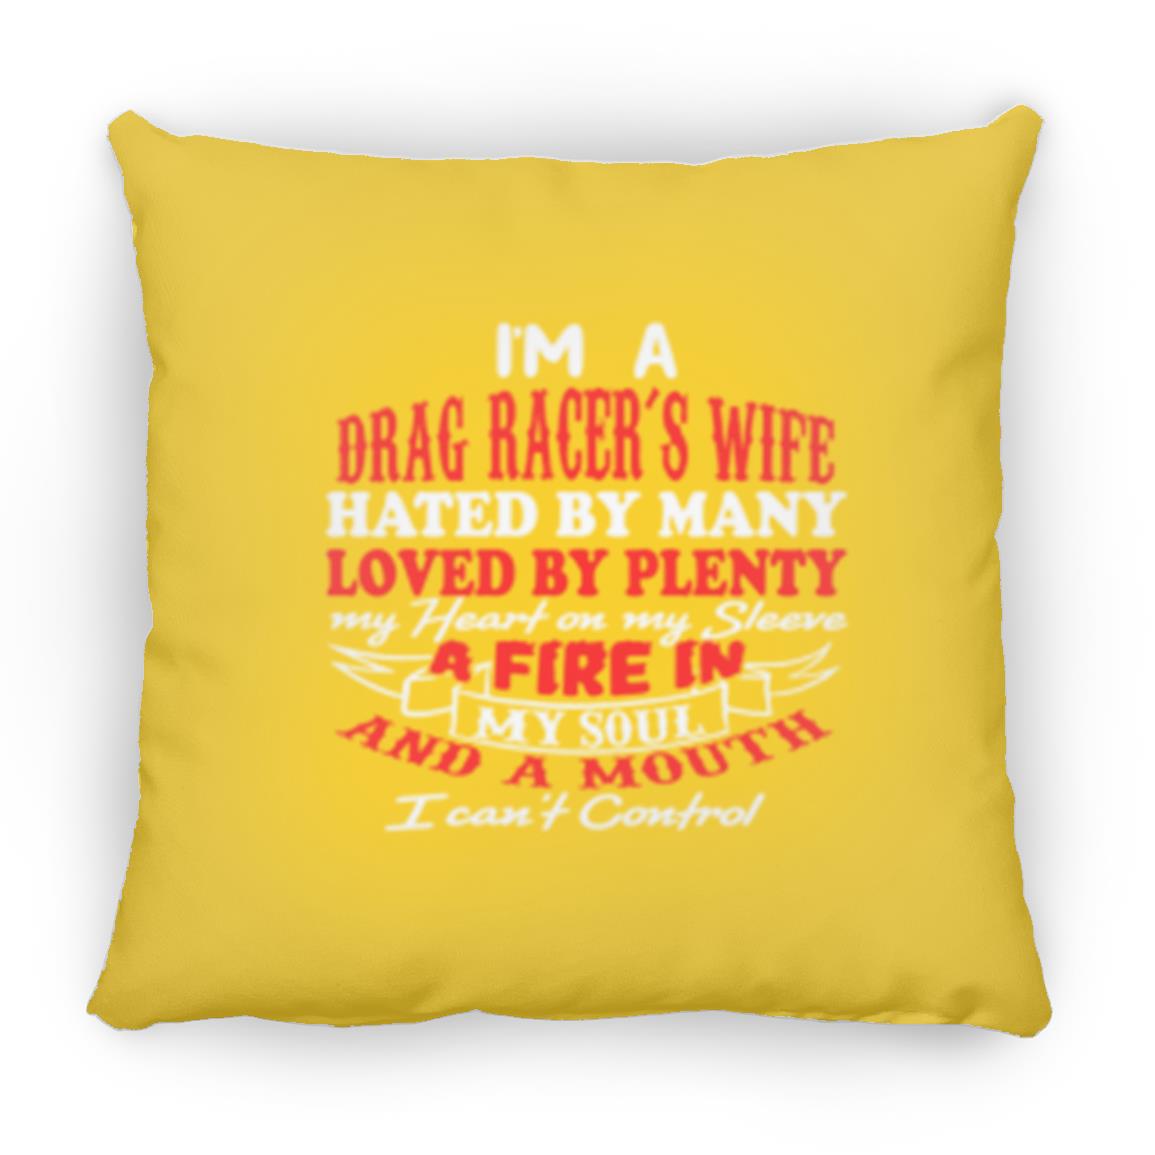 I'm A Drag Racer's Wife Hated By Many Loved By Plenty Medium Square Pillow